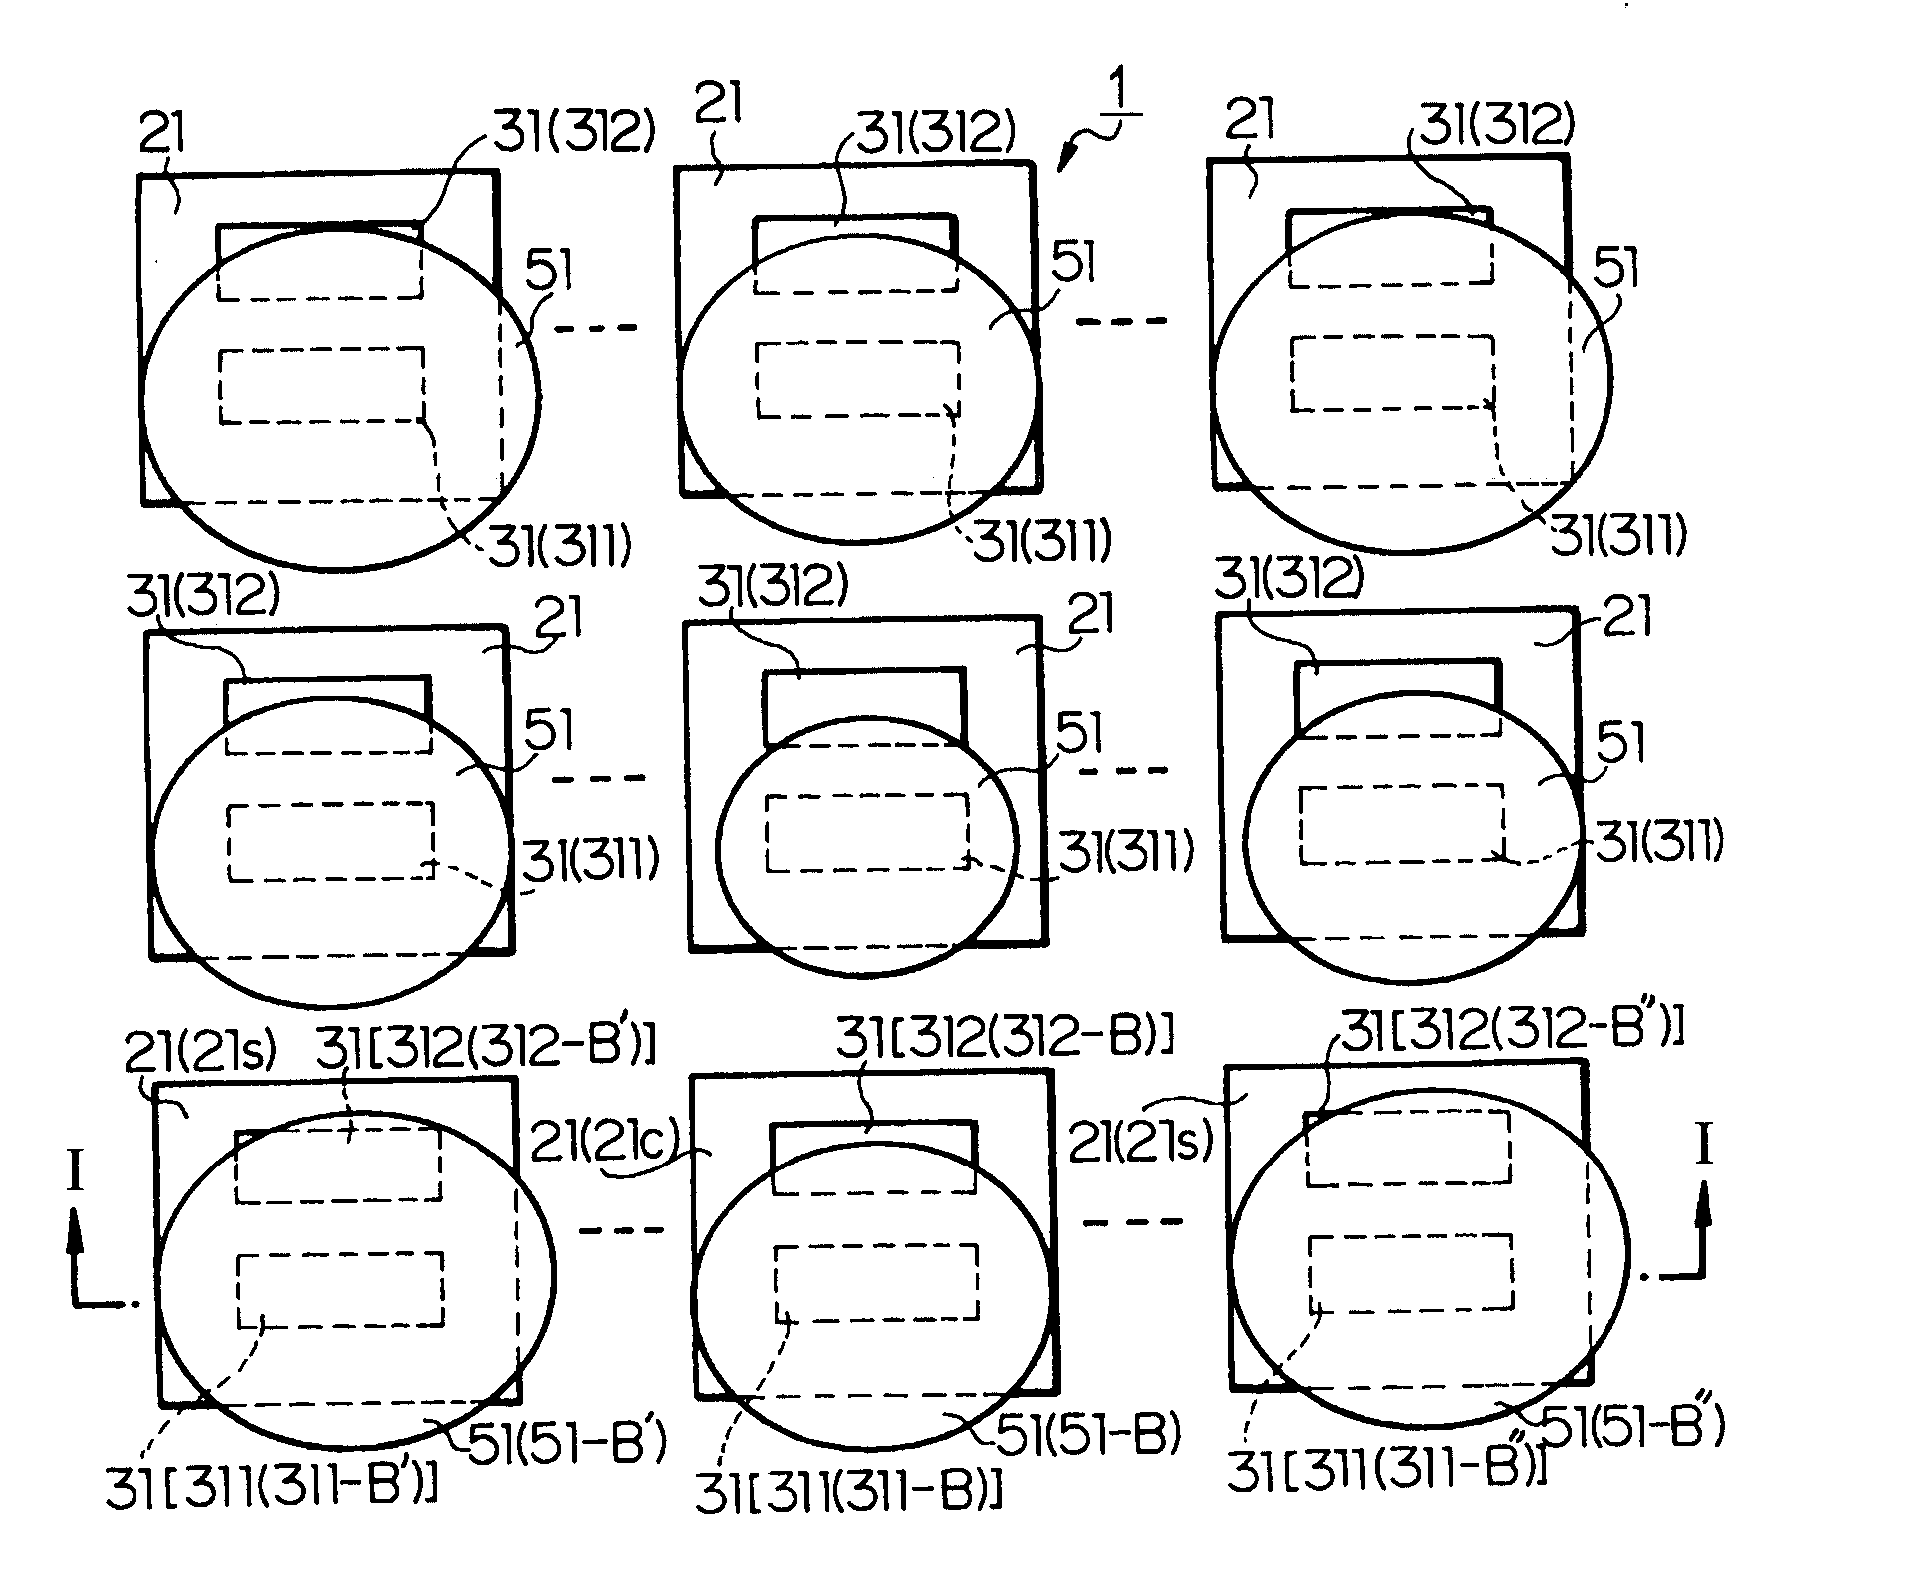 Solid-state imaging device and signal processing circuit